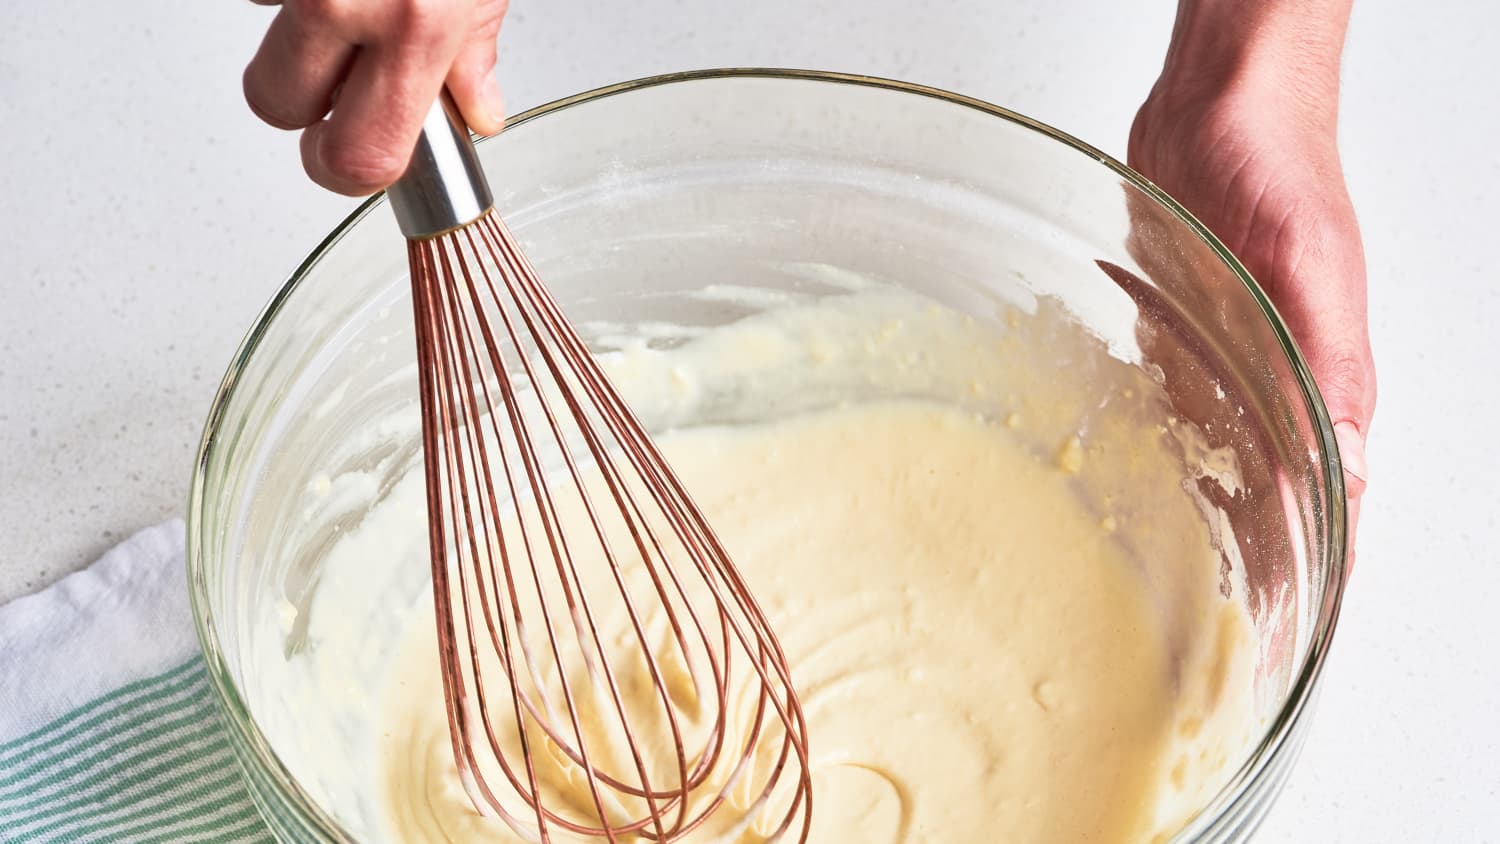 Best Easiest Way to Clean a Whisk